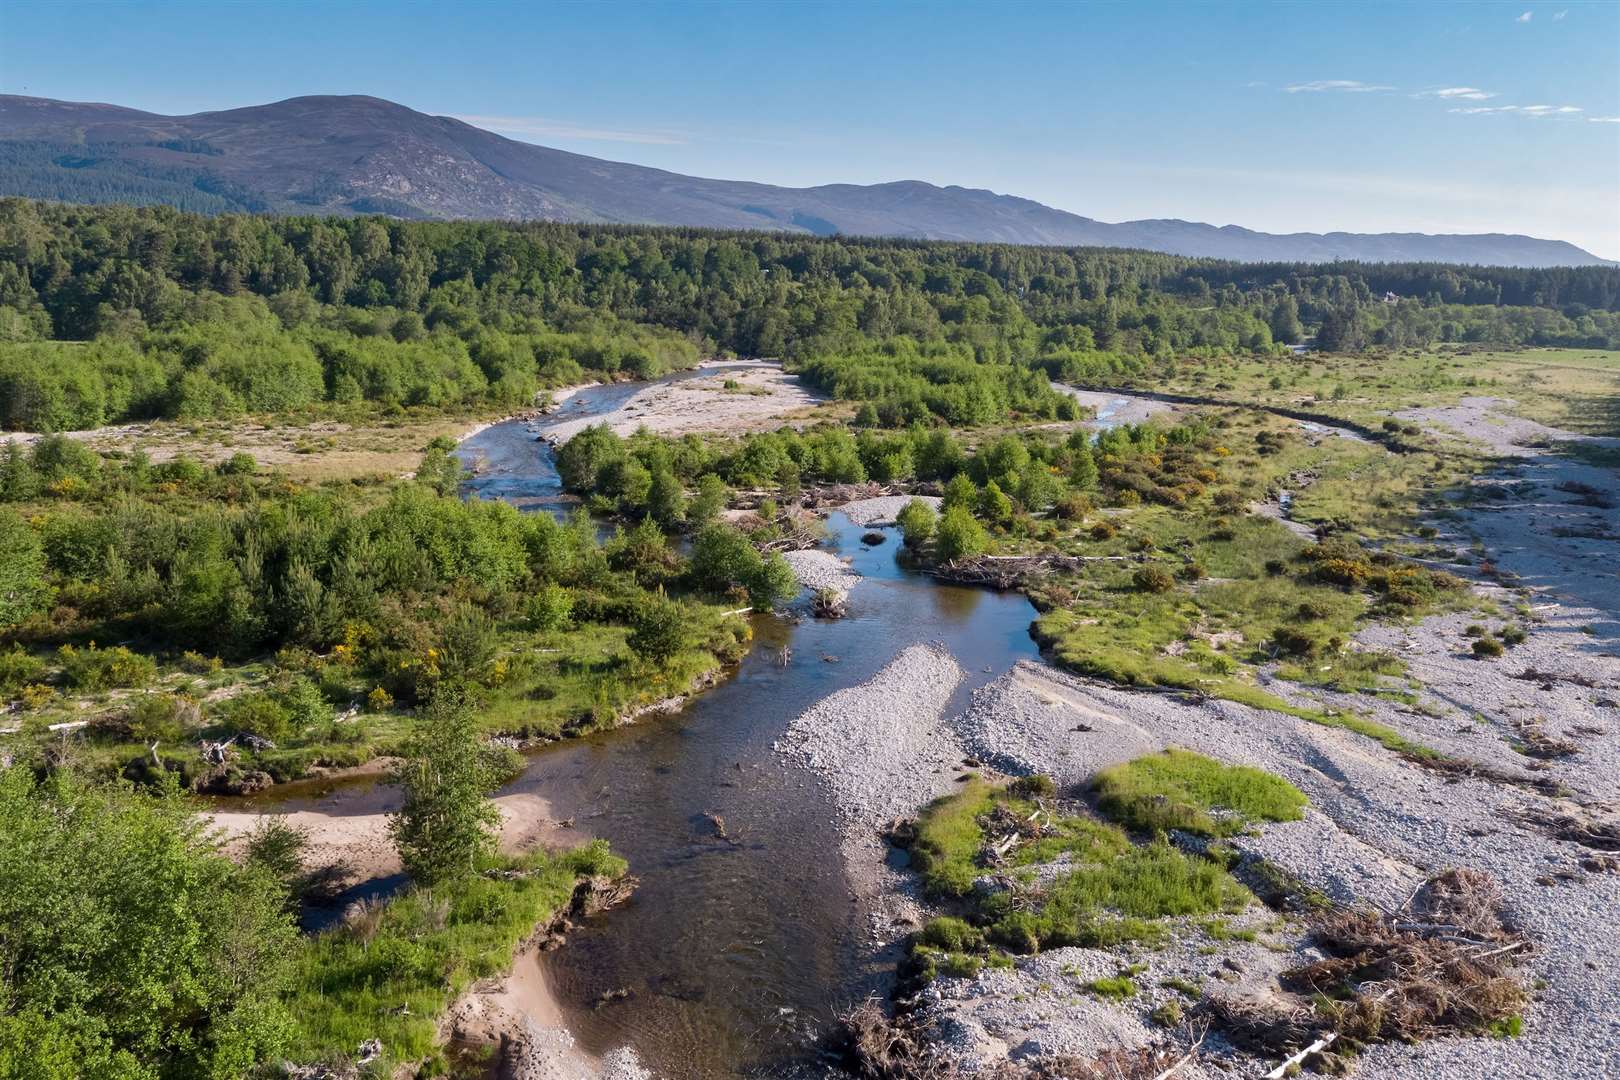 A delta of the River Feshie, lined by regenerating riparian woodland, in the Cairngorms National Park.